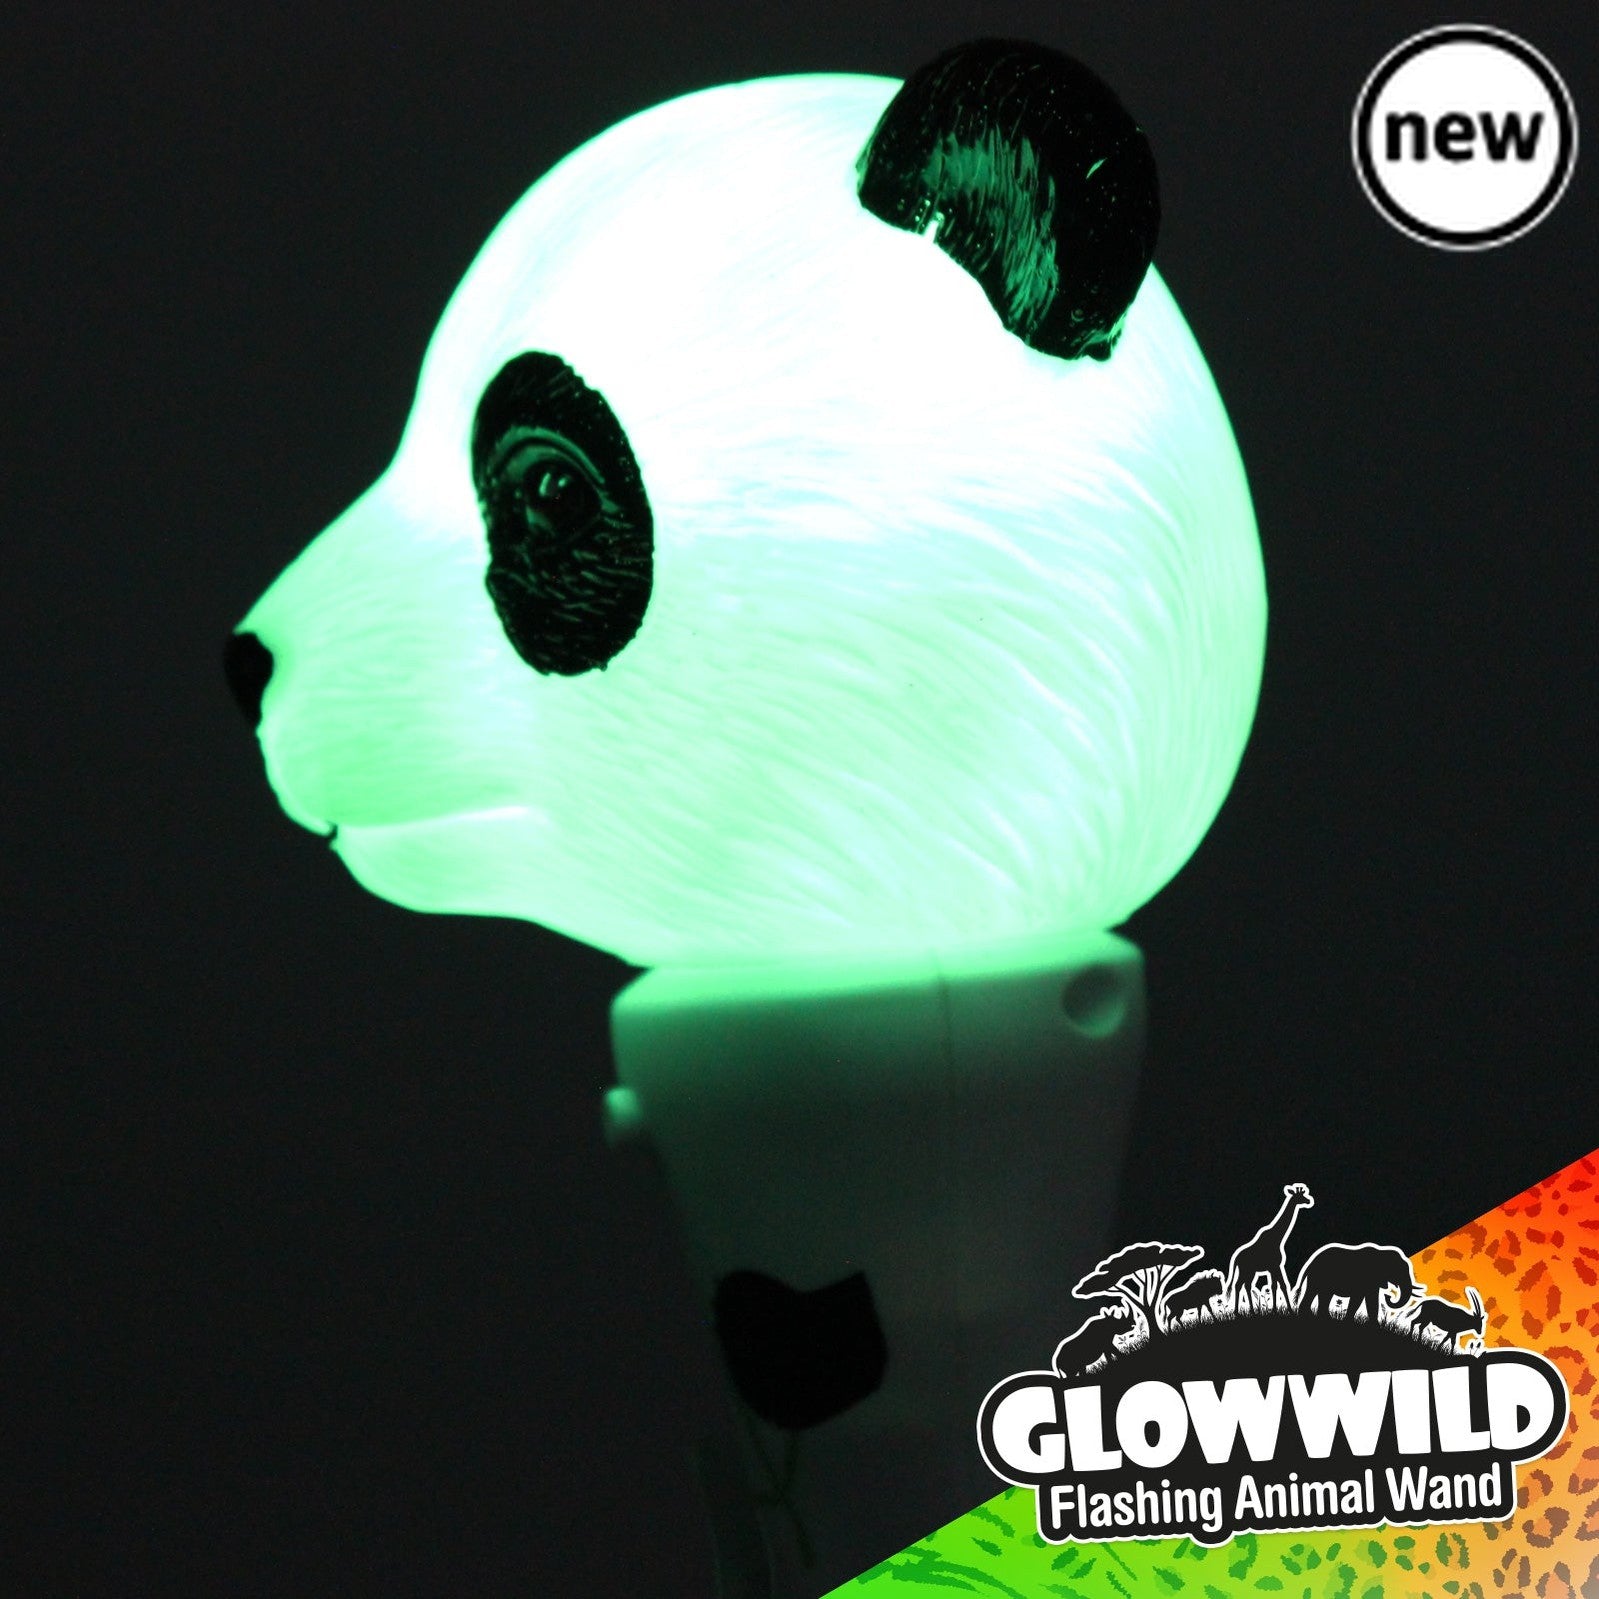 Panda Mini Light Up Animal Wand 7", Cuteness overload!! This adorable Panda Mini Light Up Animal Wand is lit with multi coloured flashing LEDs that illuminate the cute panda head in a colour flash light show! An adorable Glow Wild flashing animal wand that's just the right size for small hands, the simple on/off function makes it easy for even the smallest of kids to handle. With batteries included, this super sweet Panda Mini Light Up Animal Wand will delight with mesmerising colourful light! Panda Mini Li